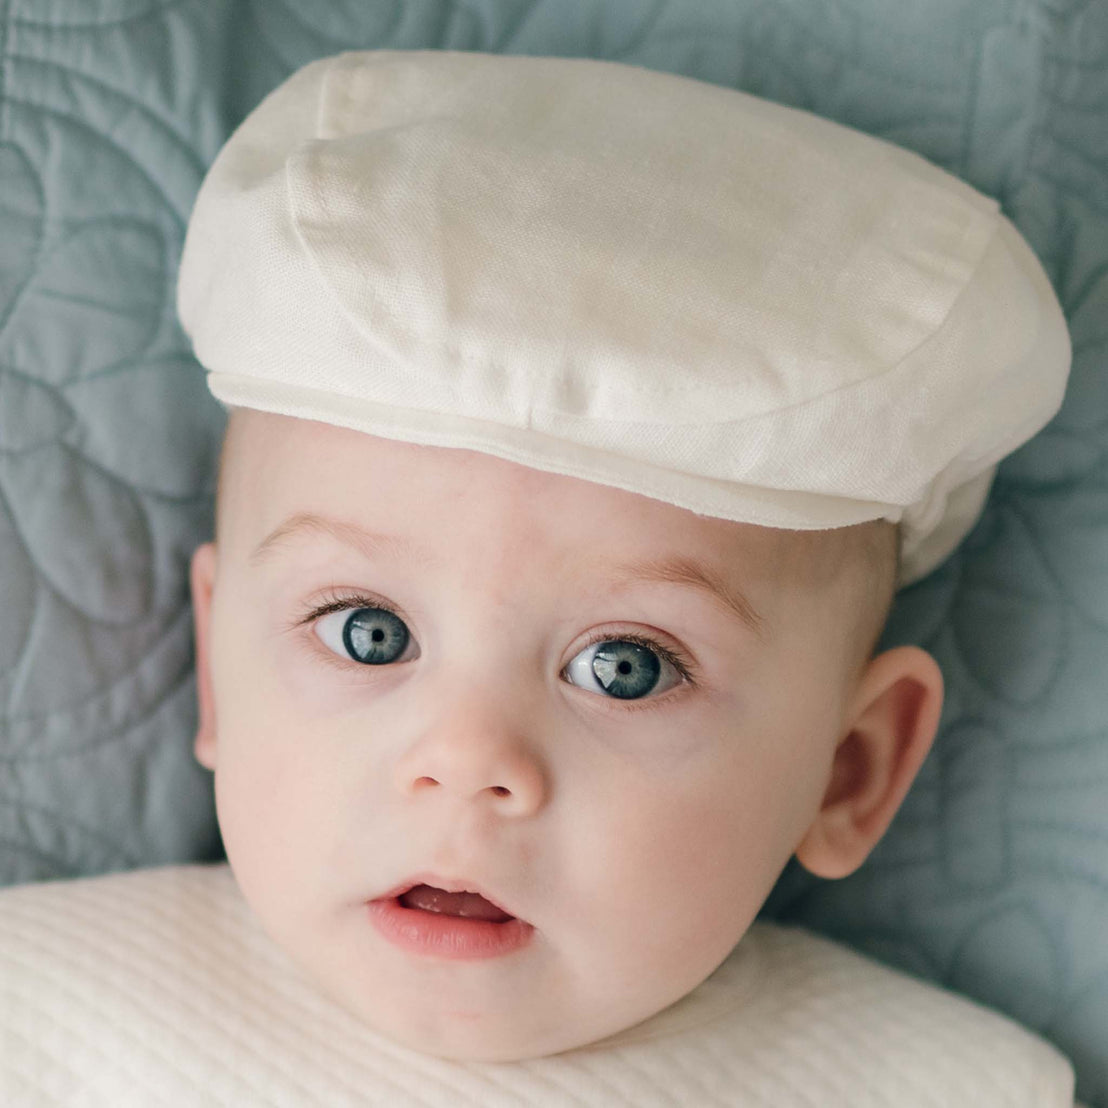 A close-up of a baby wearing the Owen Linen Newsboy Cap, with bright blue eyes and a slight open mouth, looking directly at the camera against a textured teal background.